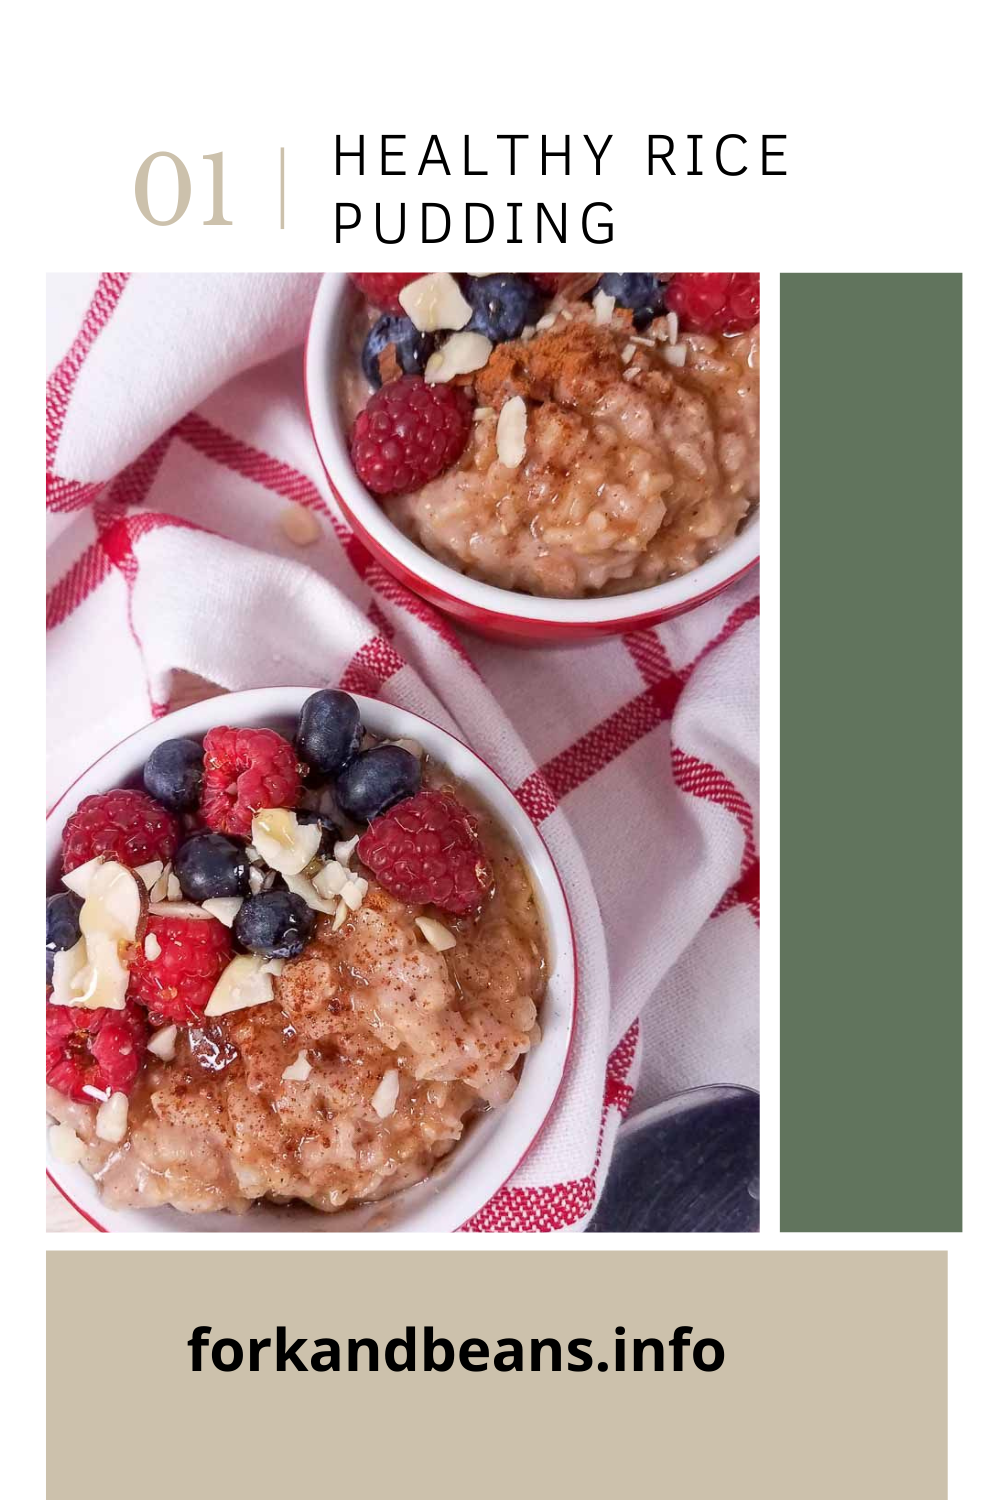 Brown rice-based recipe for healthy rice pudding